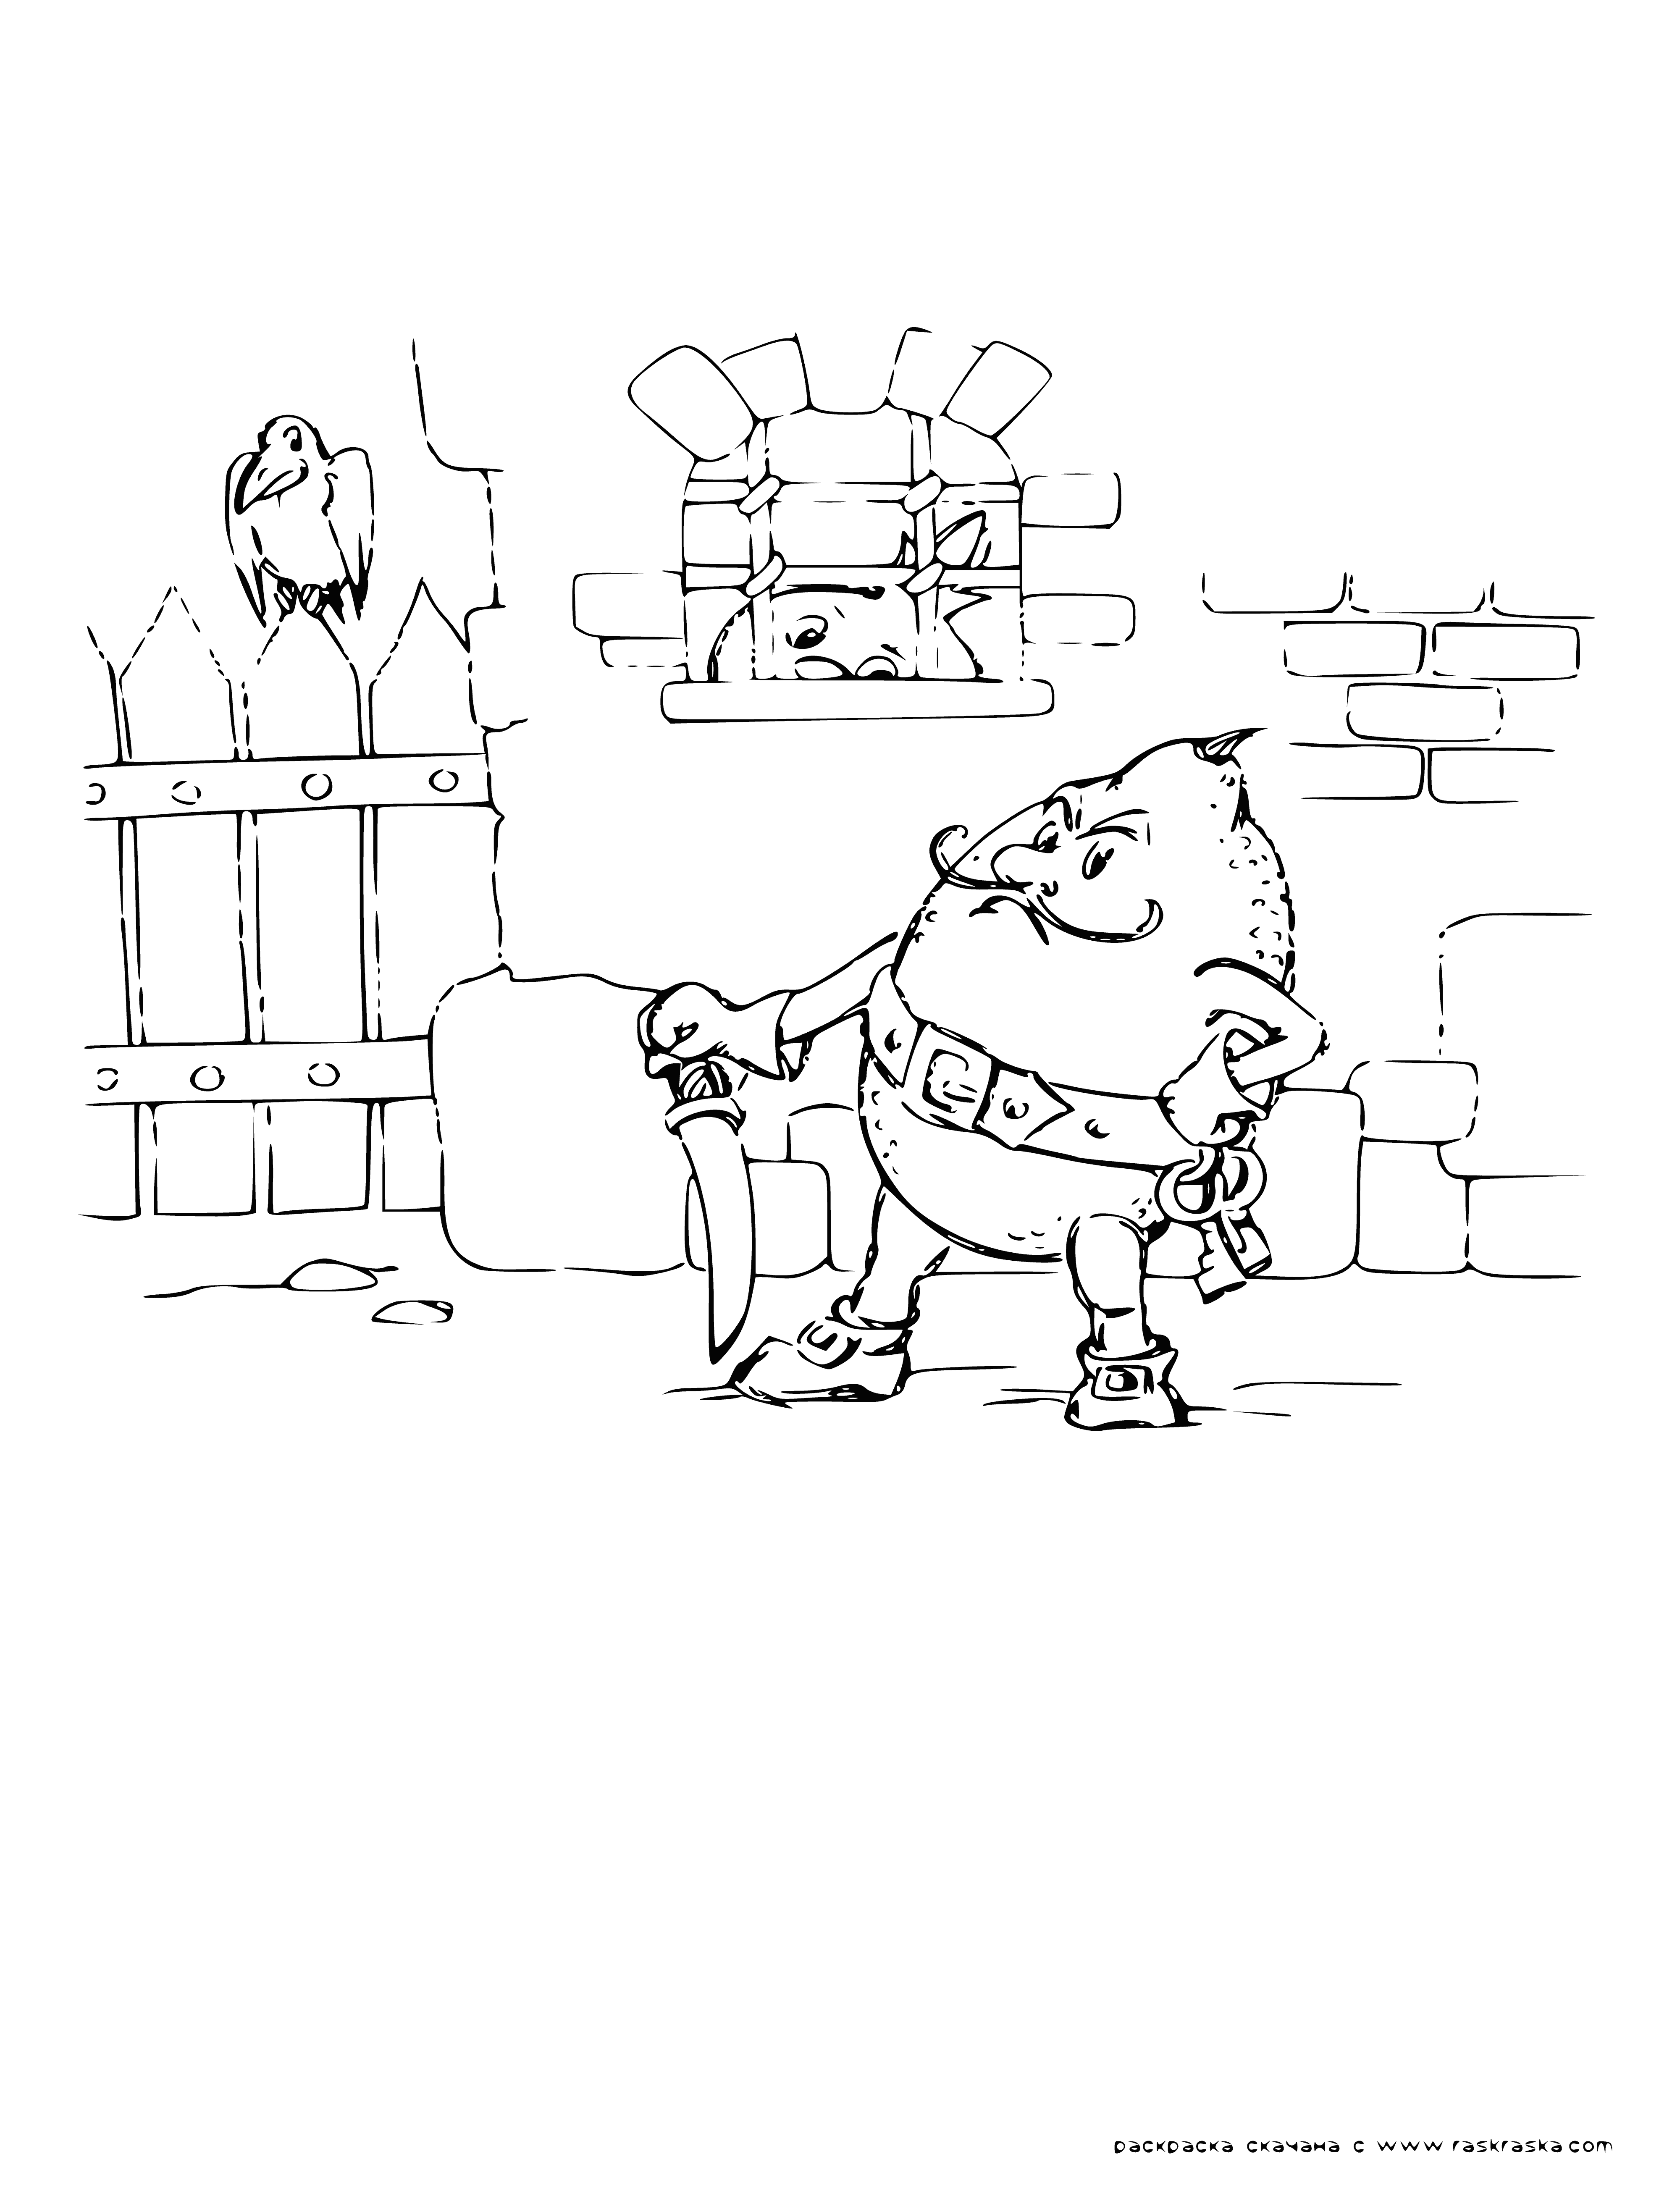 coloring page: Cipollino and his fellow prisoners, small and thin with mallets, break rocks in an ornate prison building surrounded by towers.